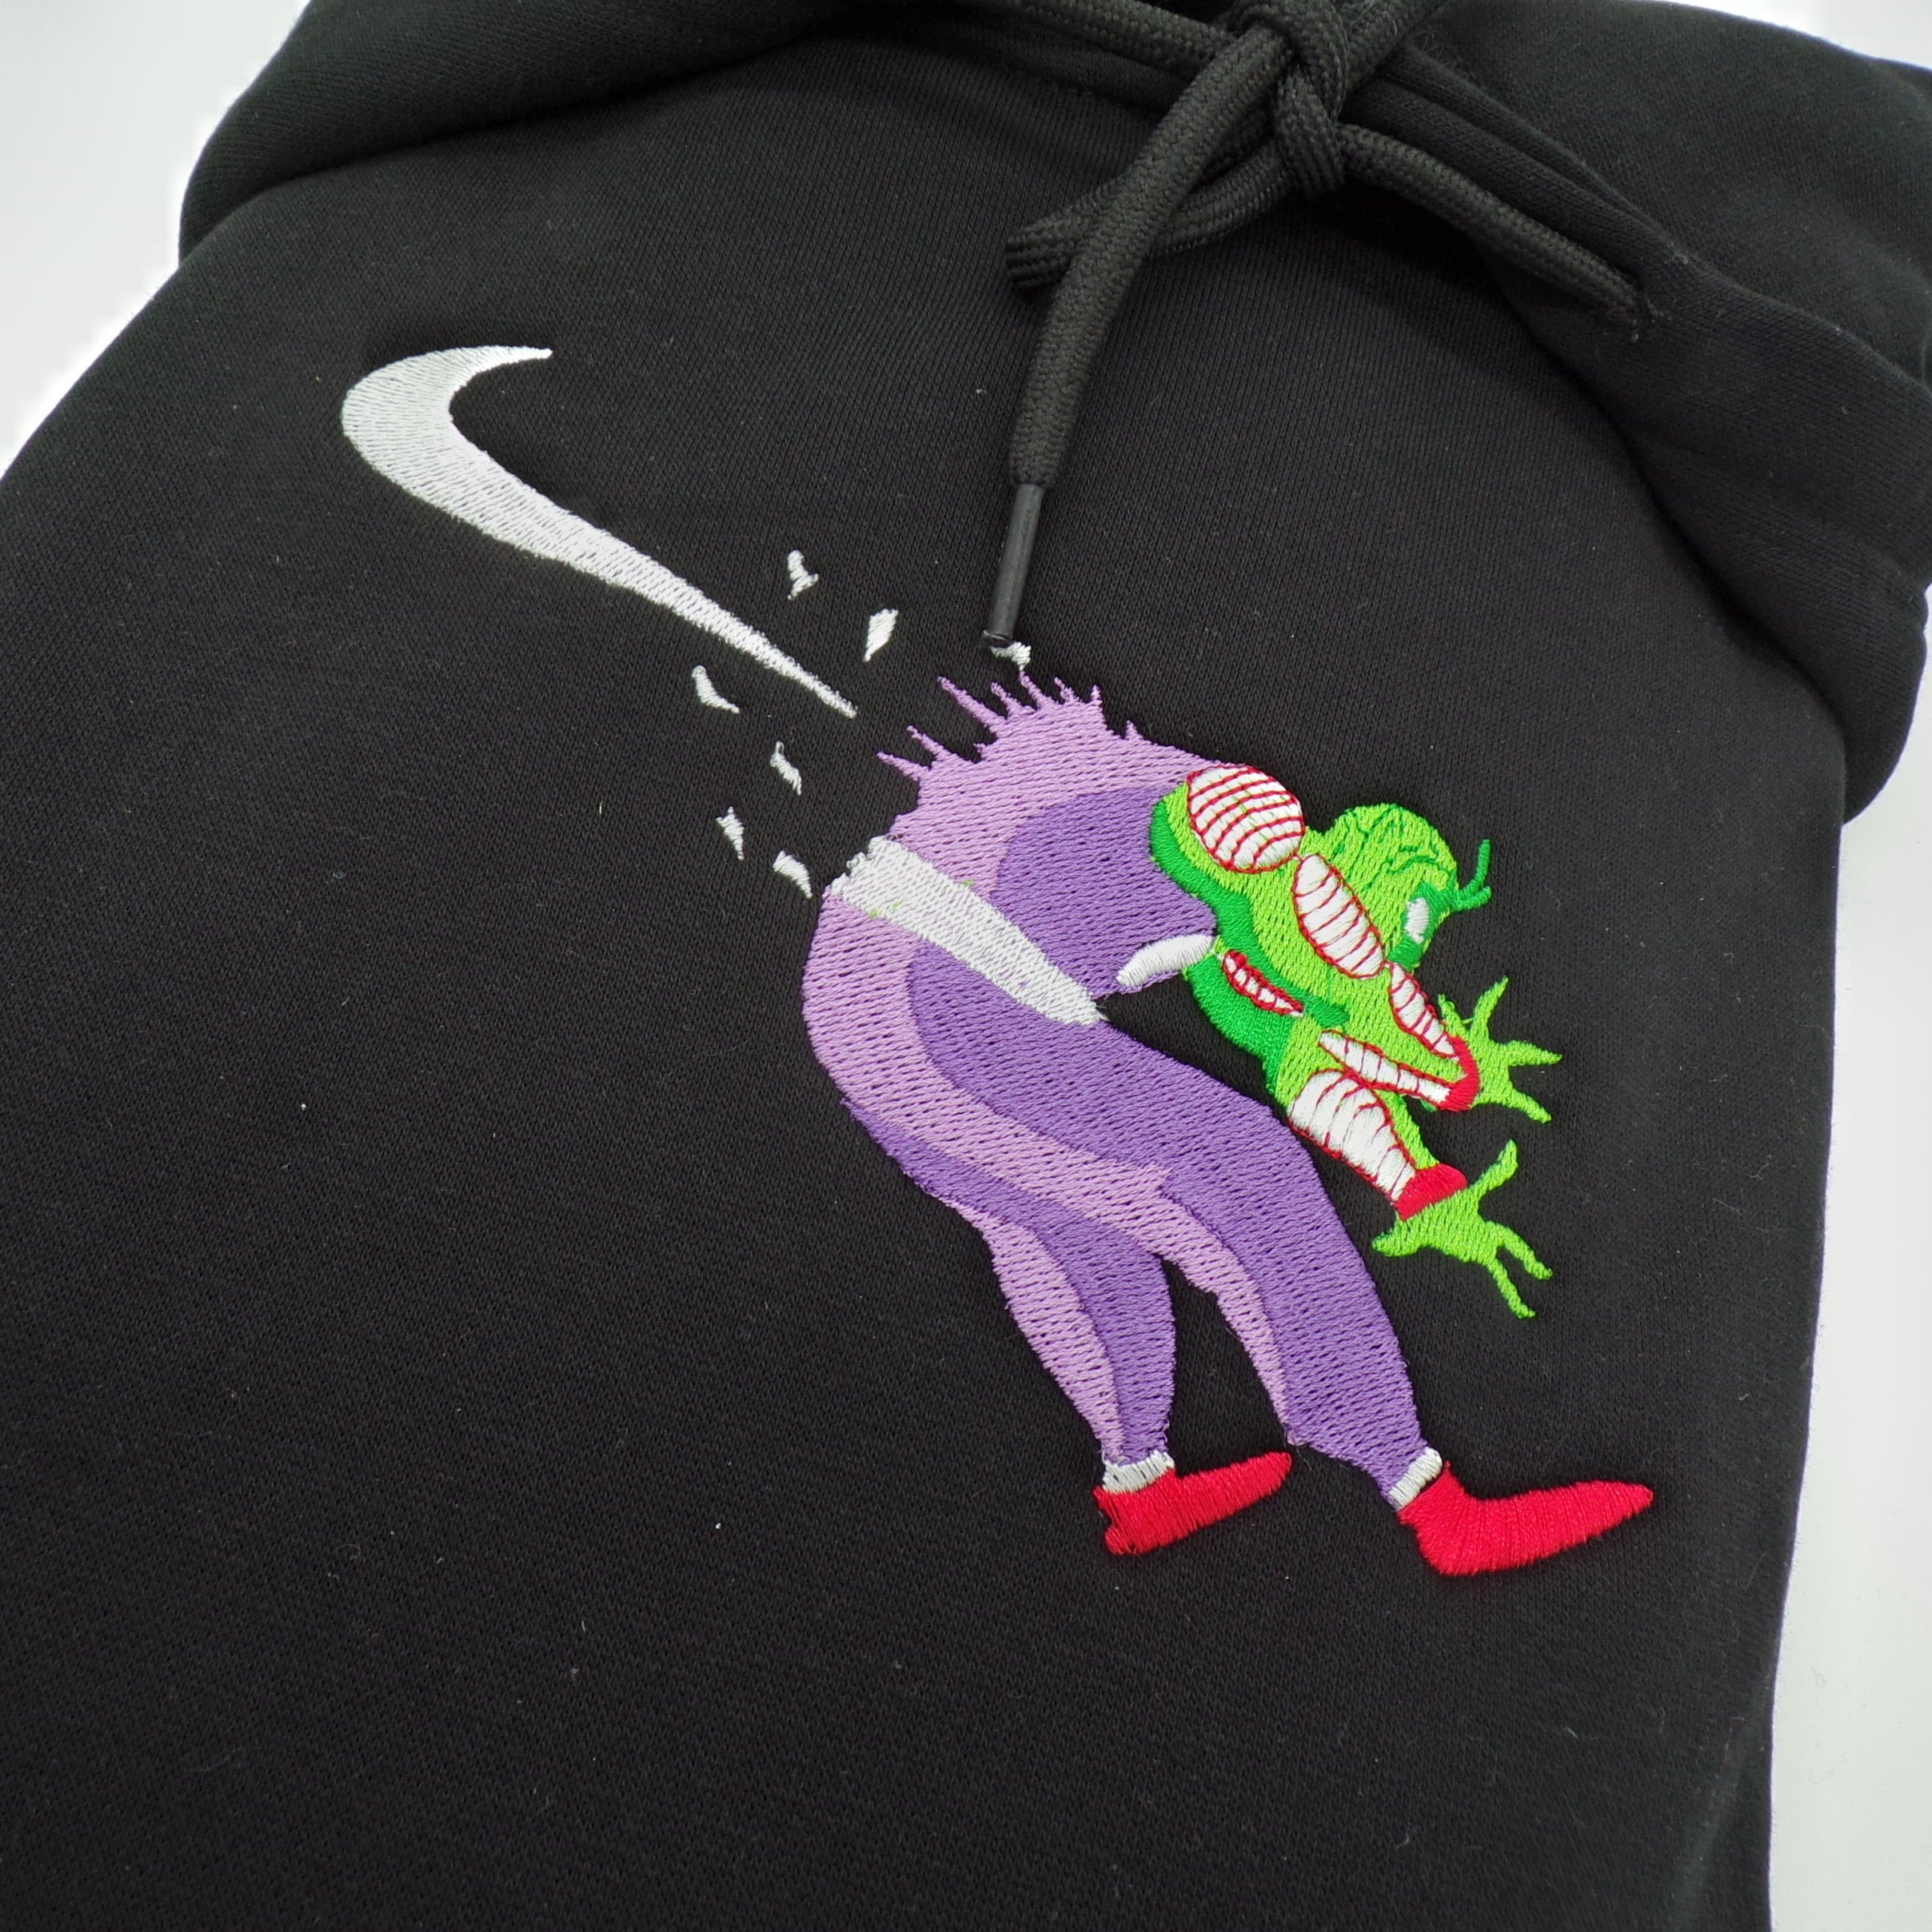 LIMITED DRAGONBALL-Z X DEATH BY PICCOLO EMBROIDERED HOODIE